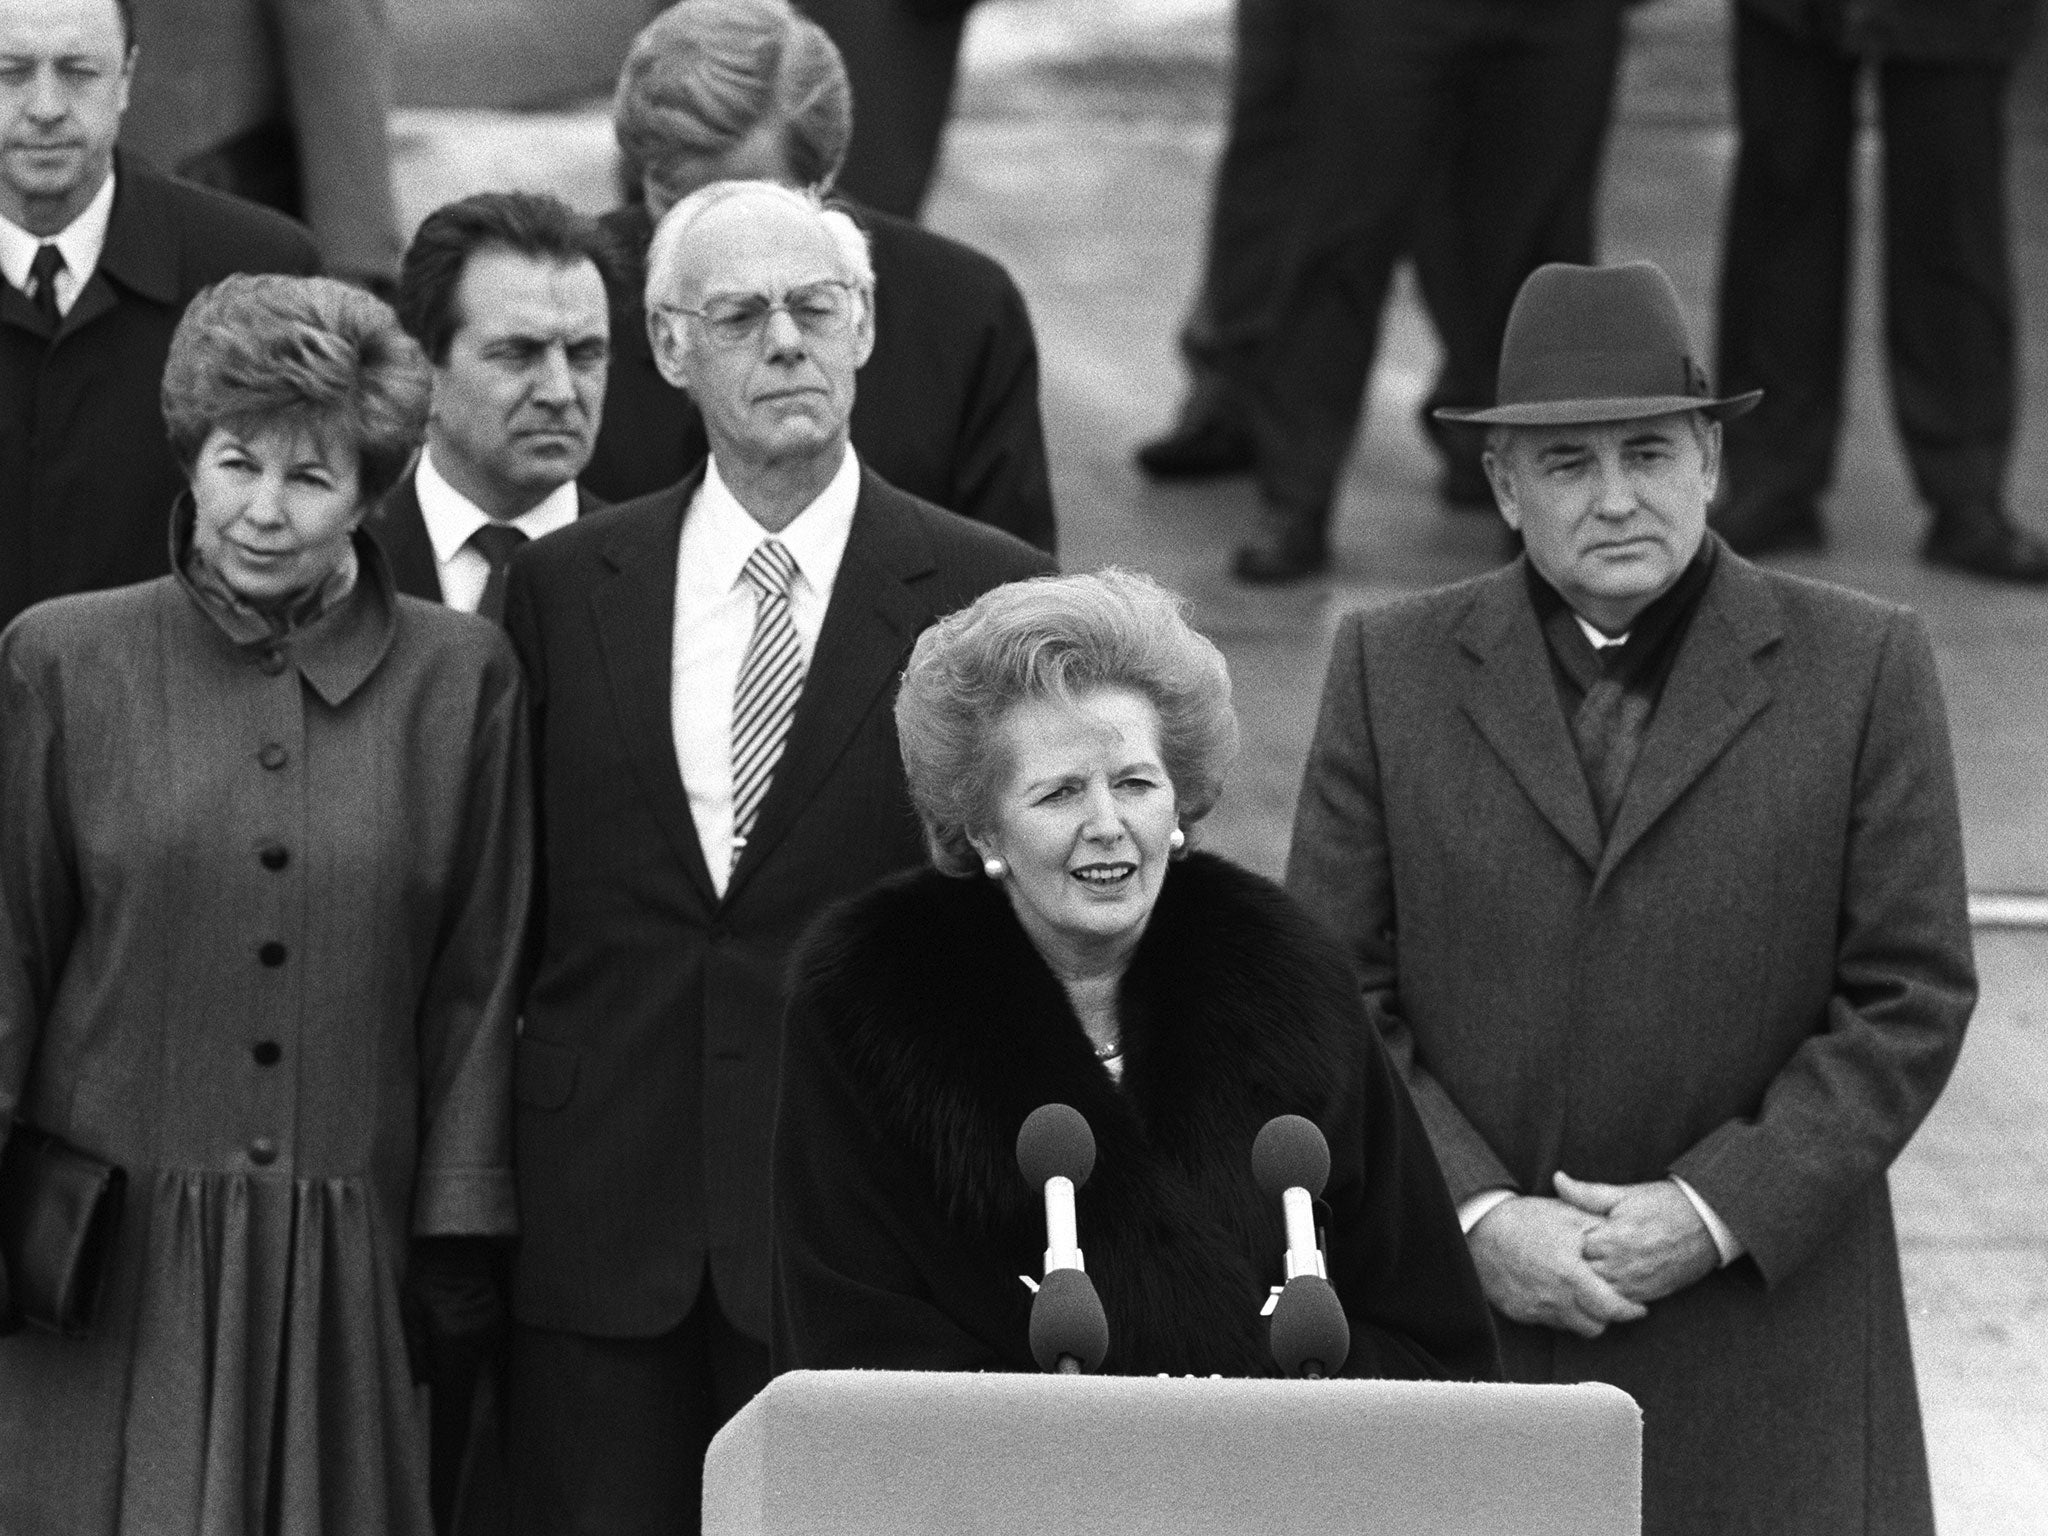 Prime Minister Margaret Thatcher with Soviet President Mikhail Gorbachev during a state visit in 1989